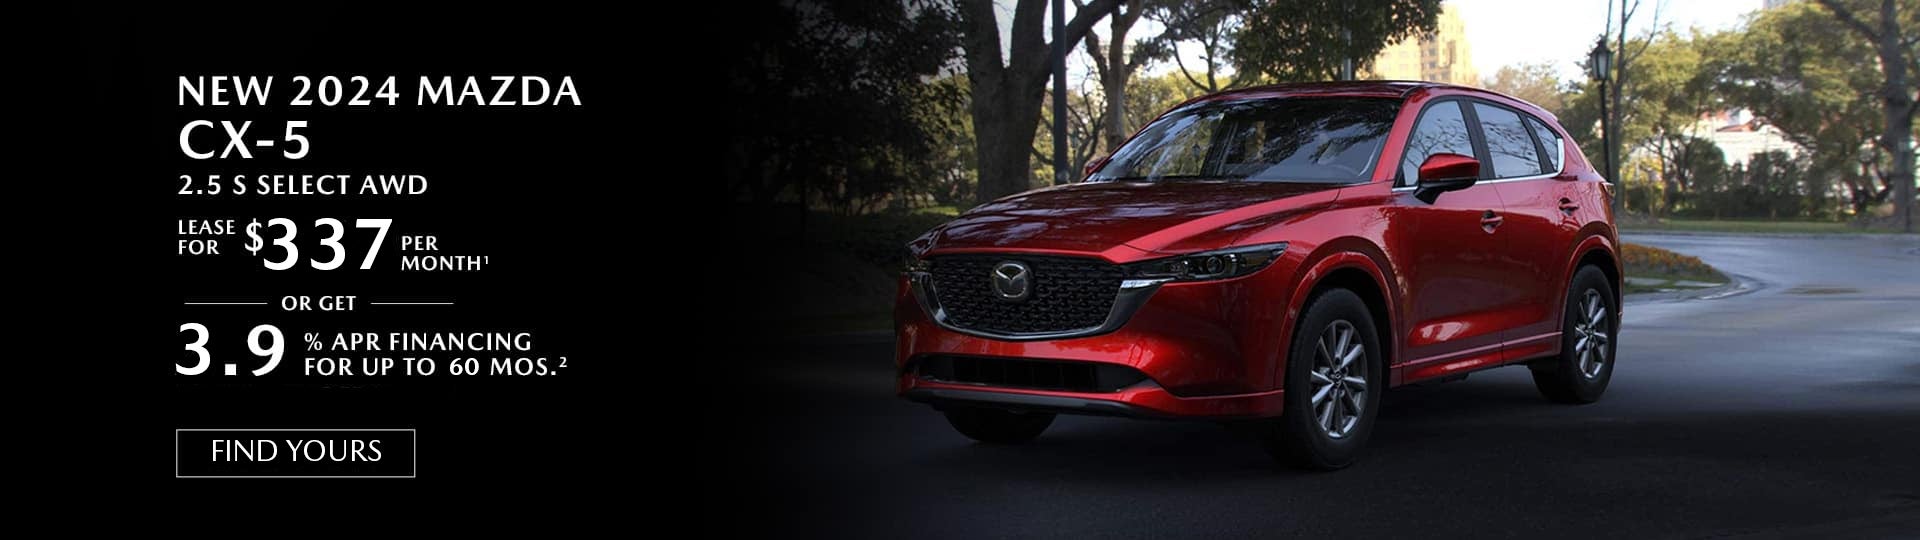 2024 Mazda CX-5 Special Offers